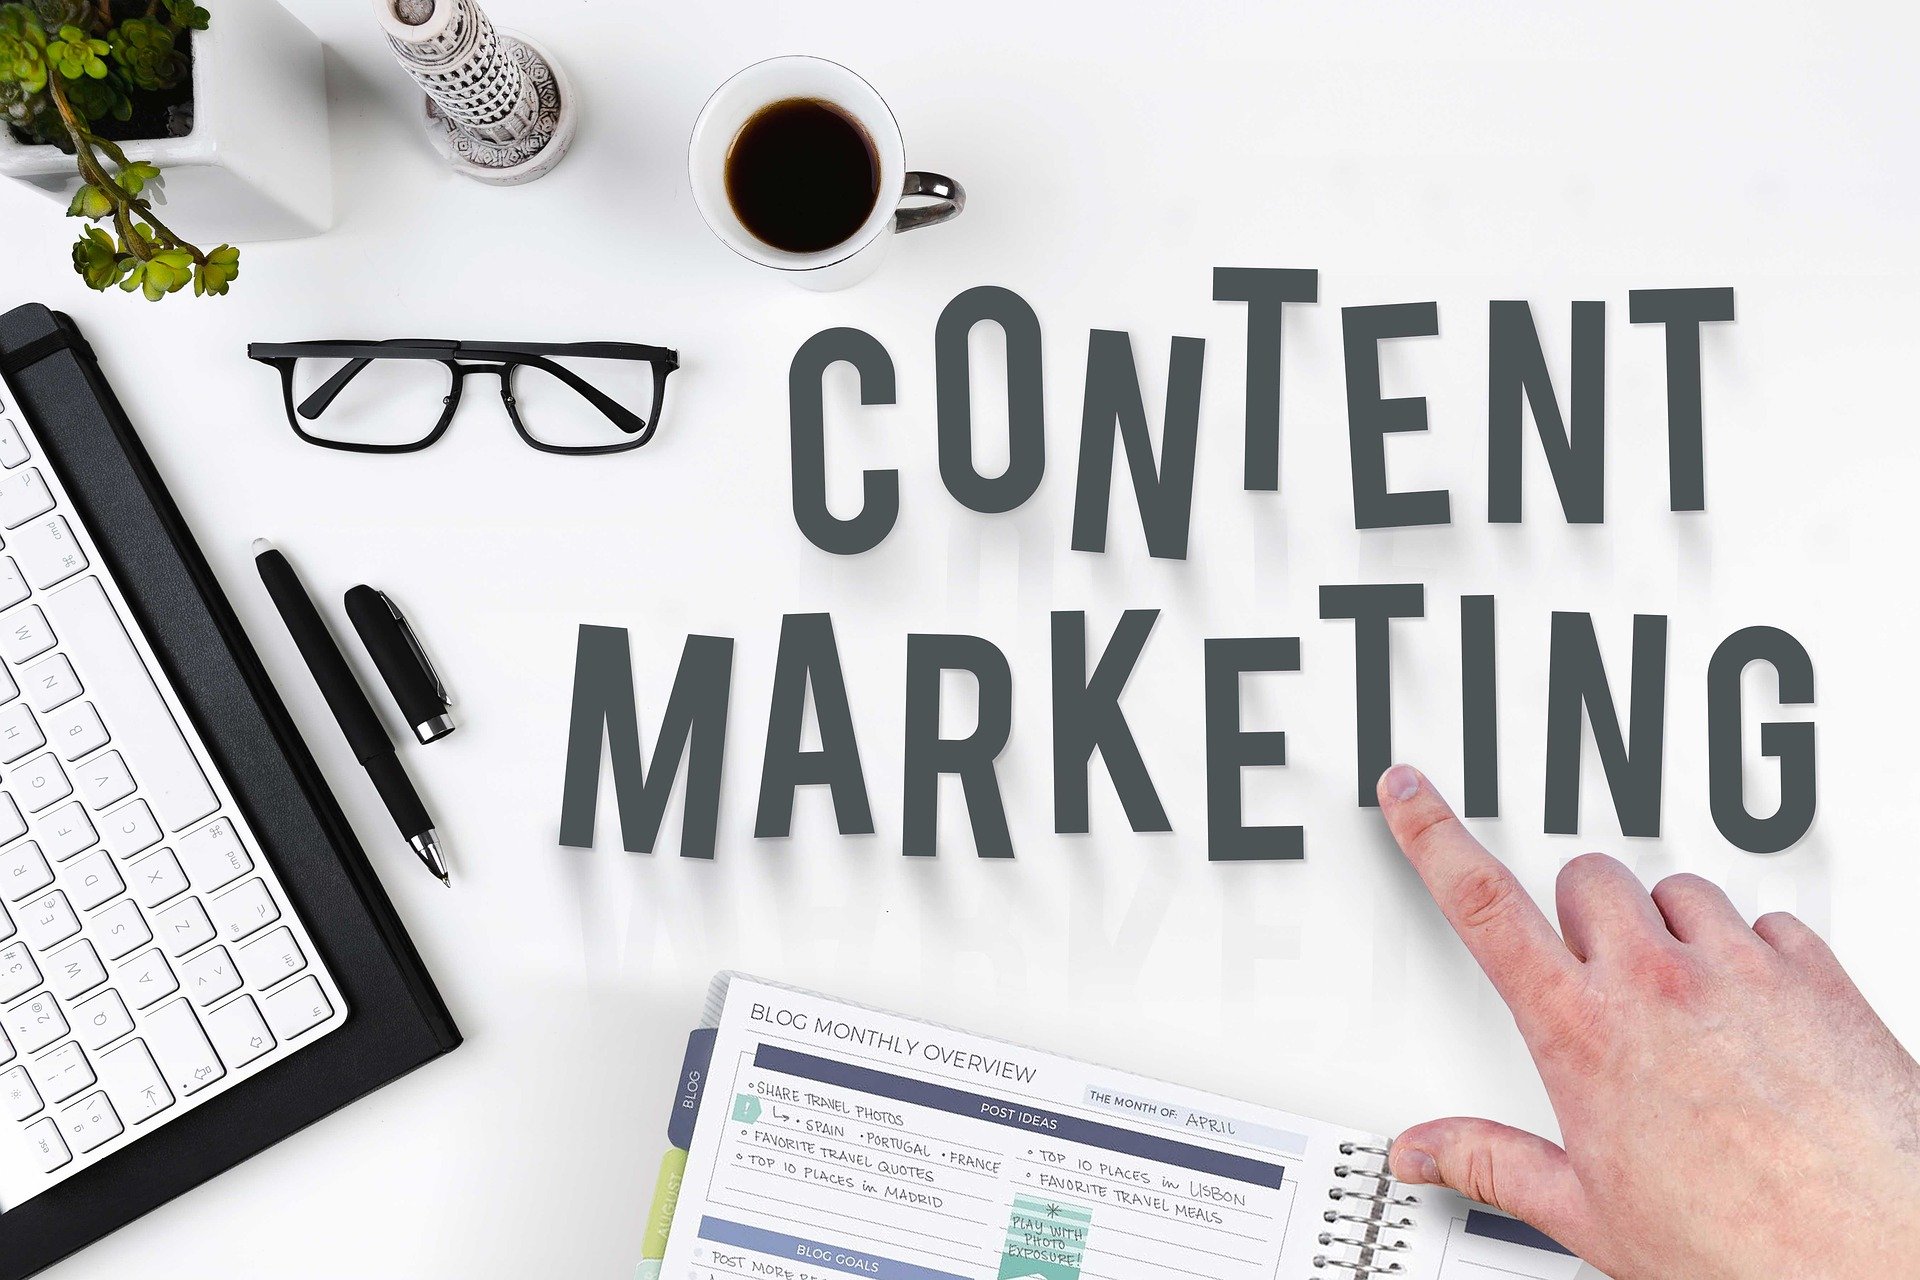 Best Article Rewriter Tool for Content Marketing